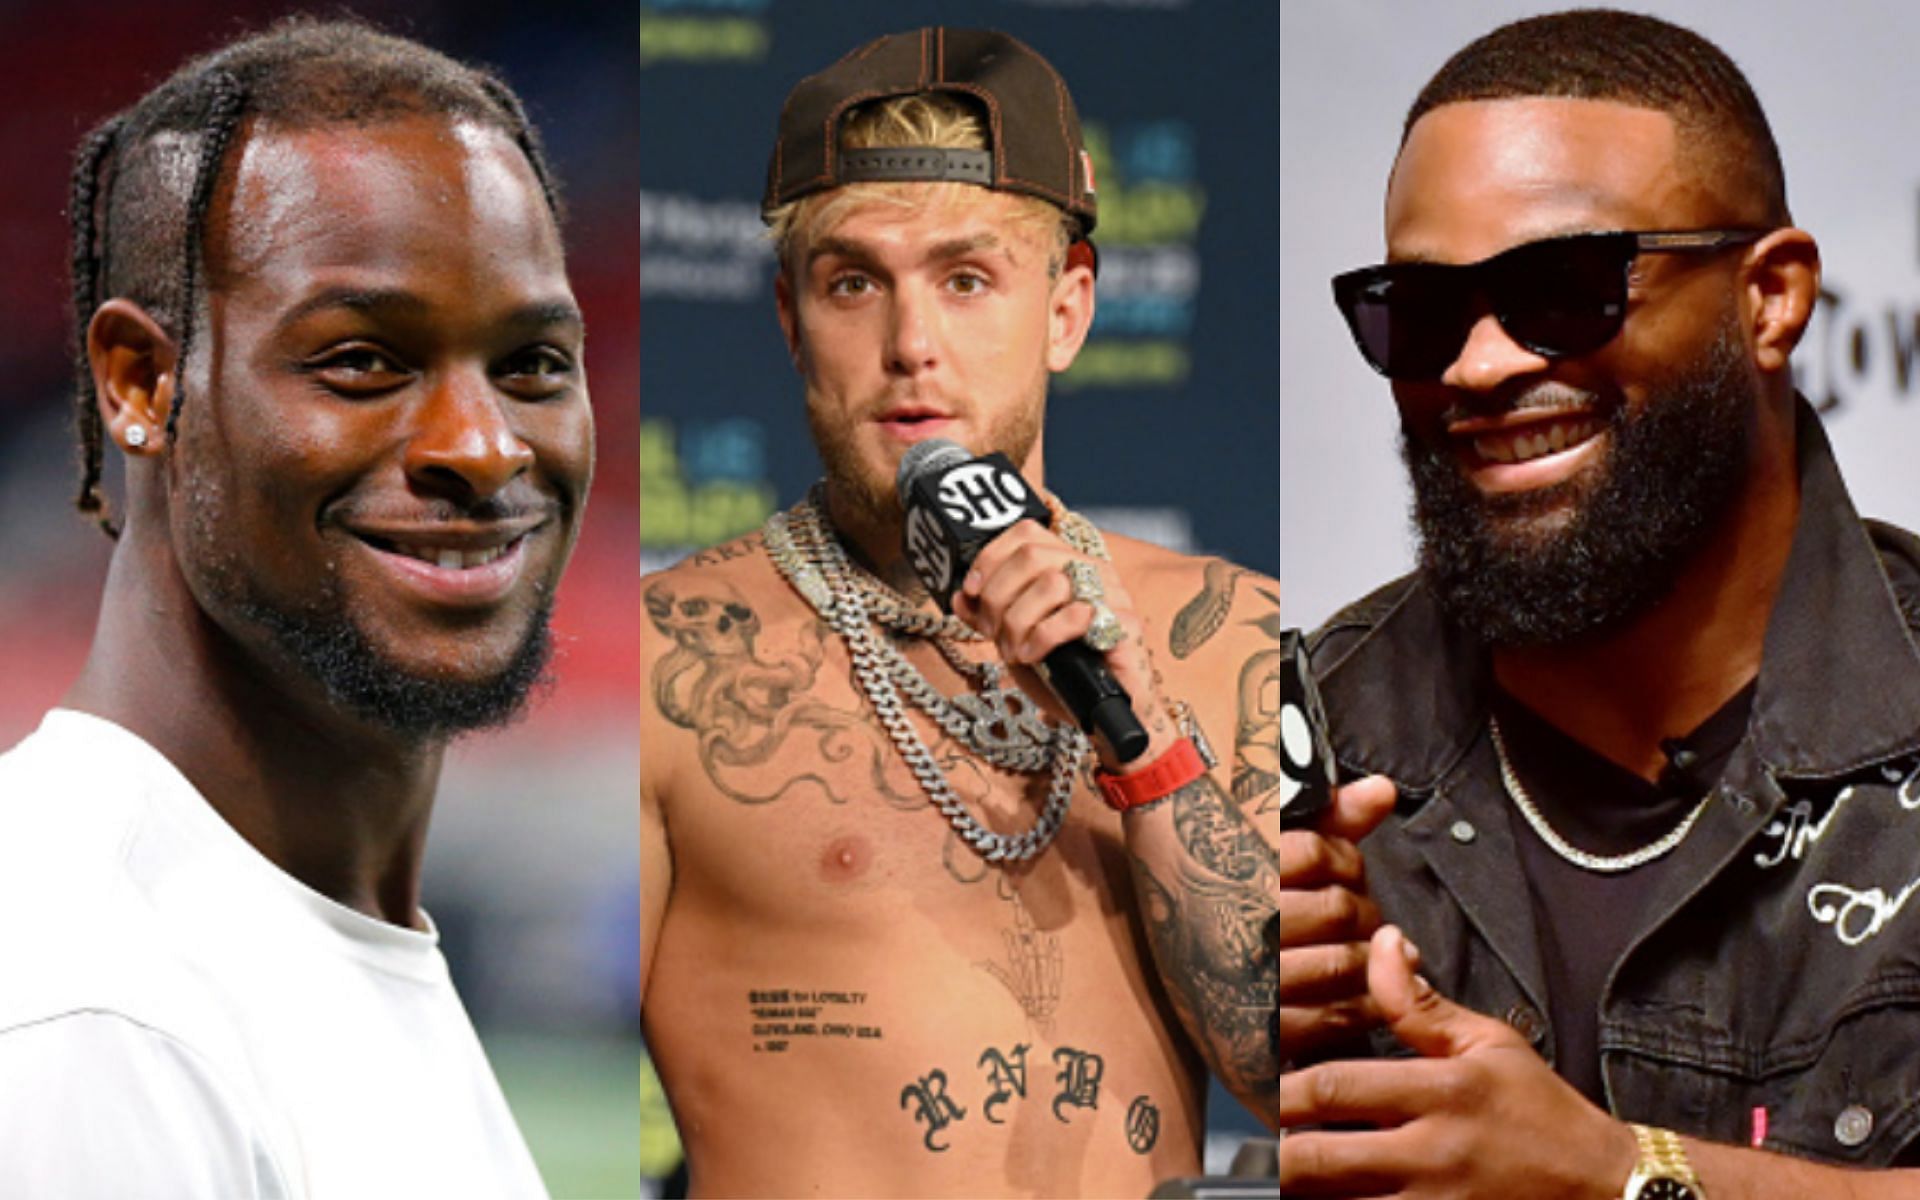 Le&rsquo;Veon Bell (left); Jake Paul (center); Tyron Woodley (right)